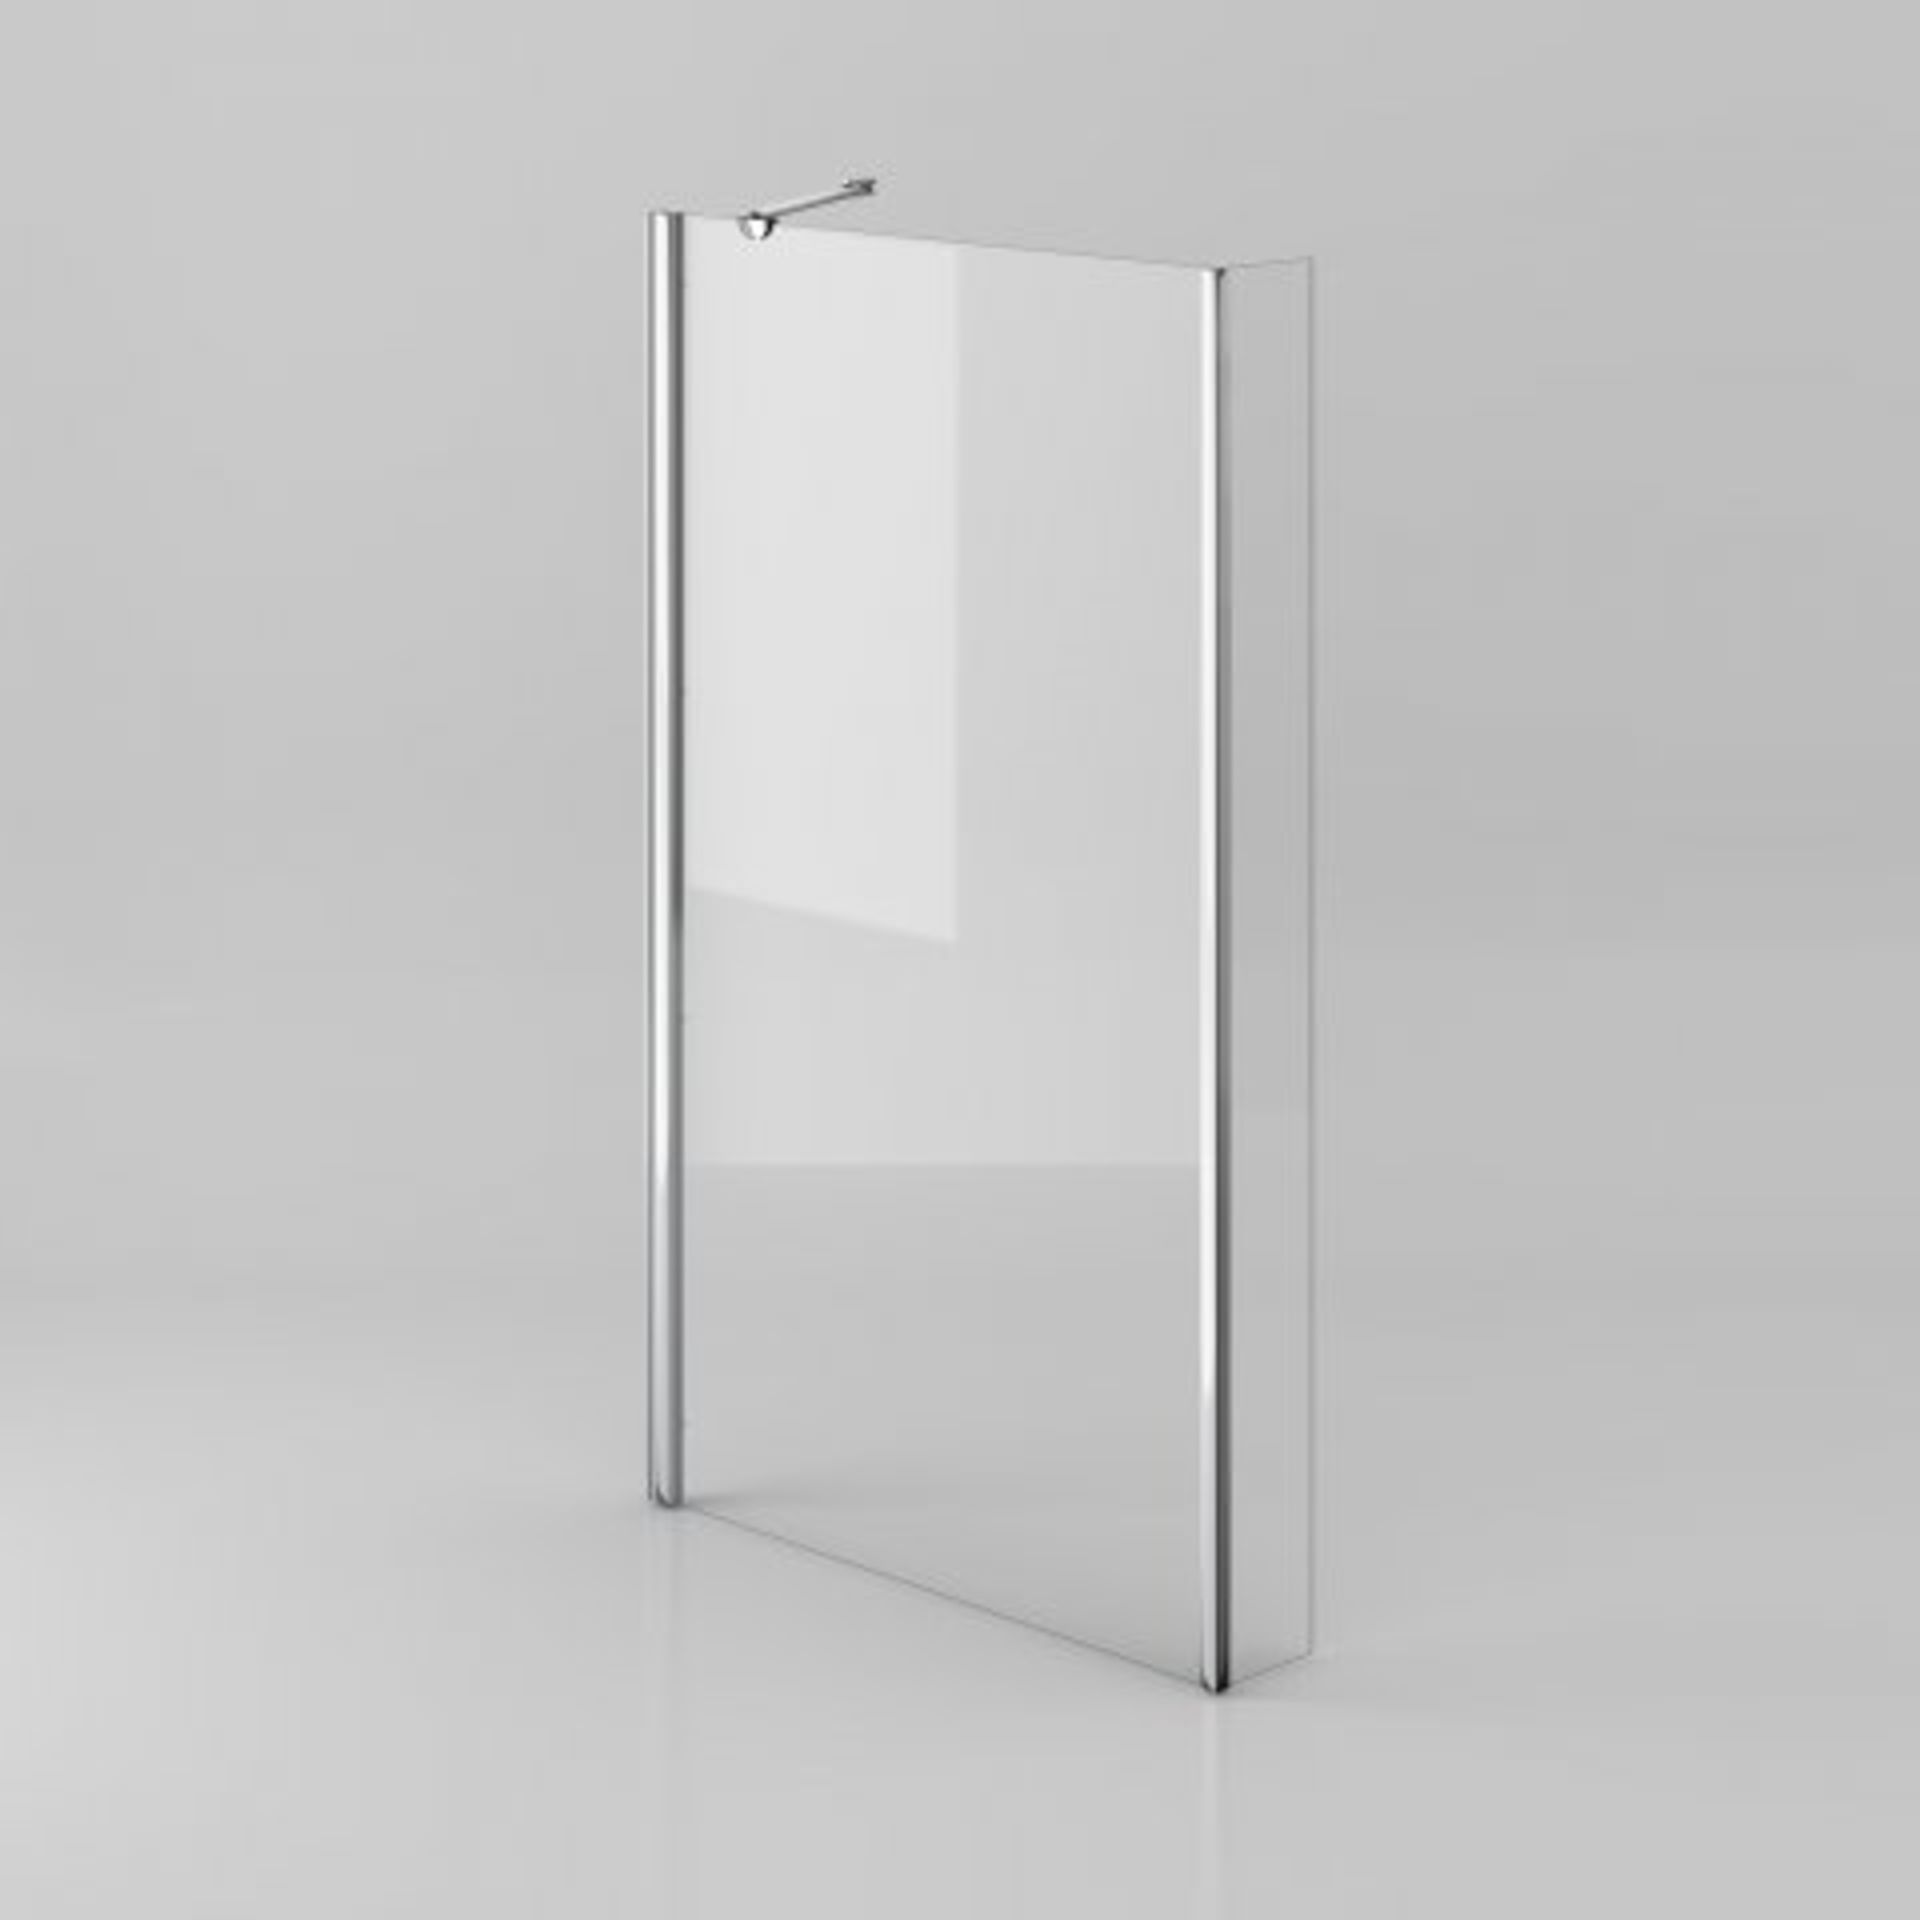 (T262) 805mm - 4mm - L Shape Bath Screen RRP £149.99 4mm Tempered Saftey Glass Screen comes complete